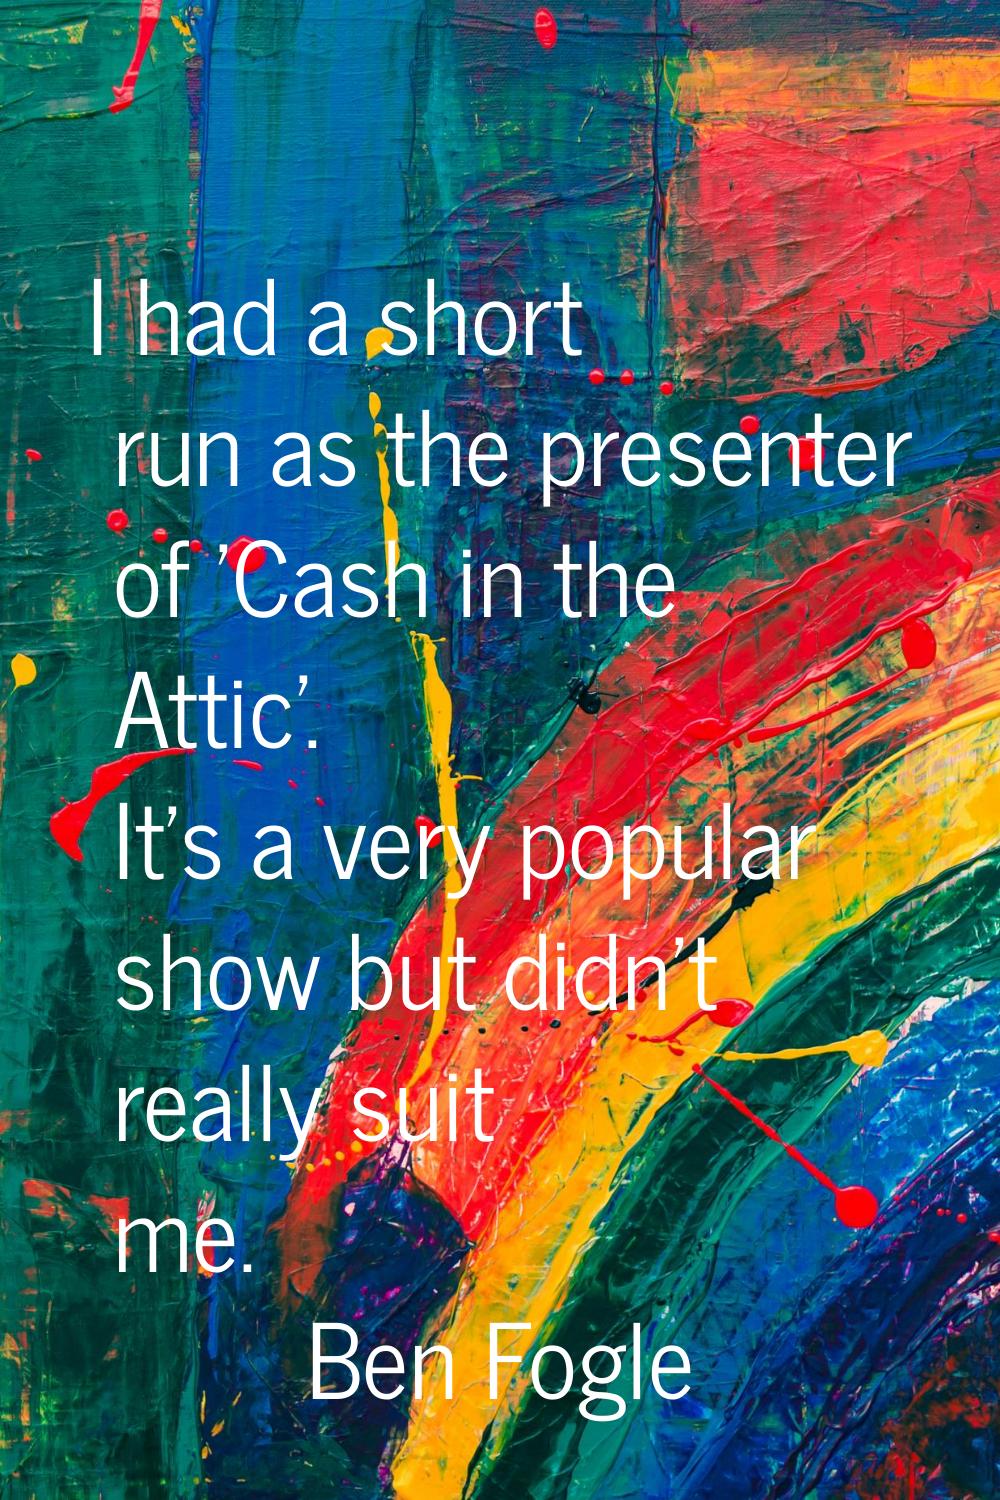 I had a short run as the presenter of 'Cash in the Attic'. It's a very popular show but didn't real